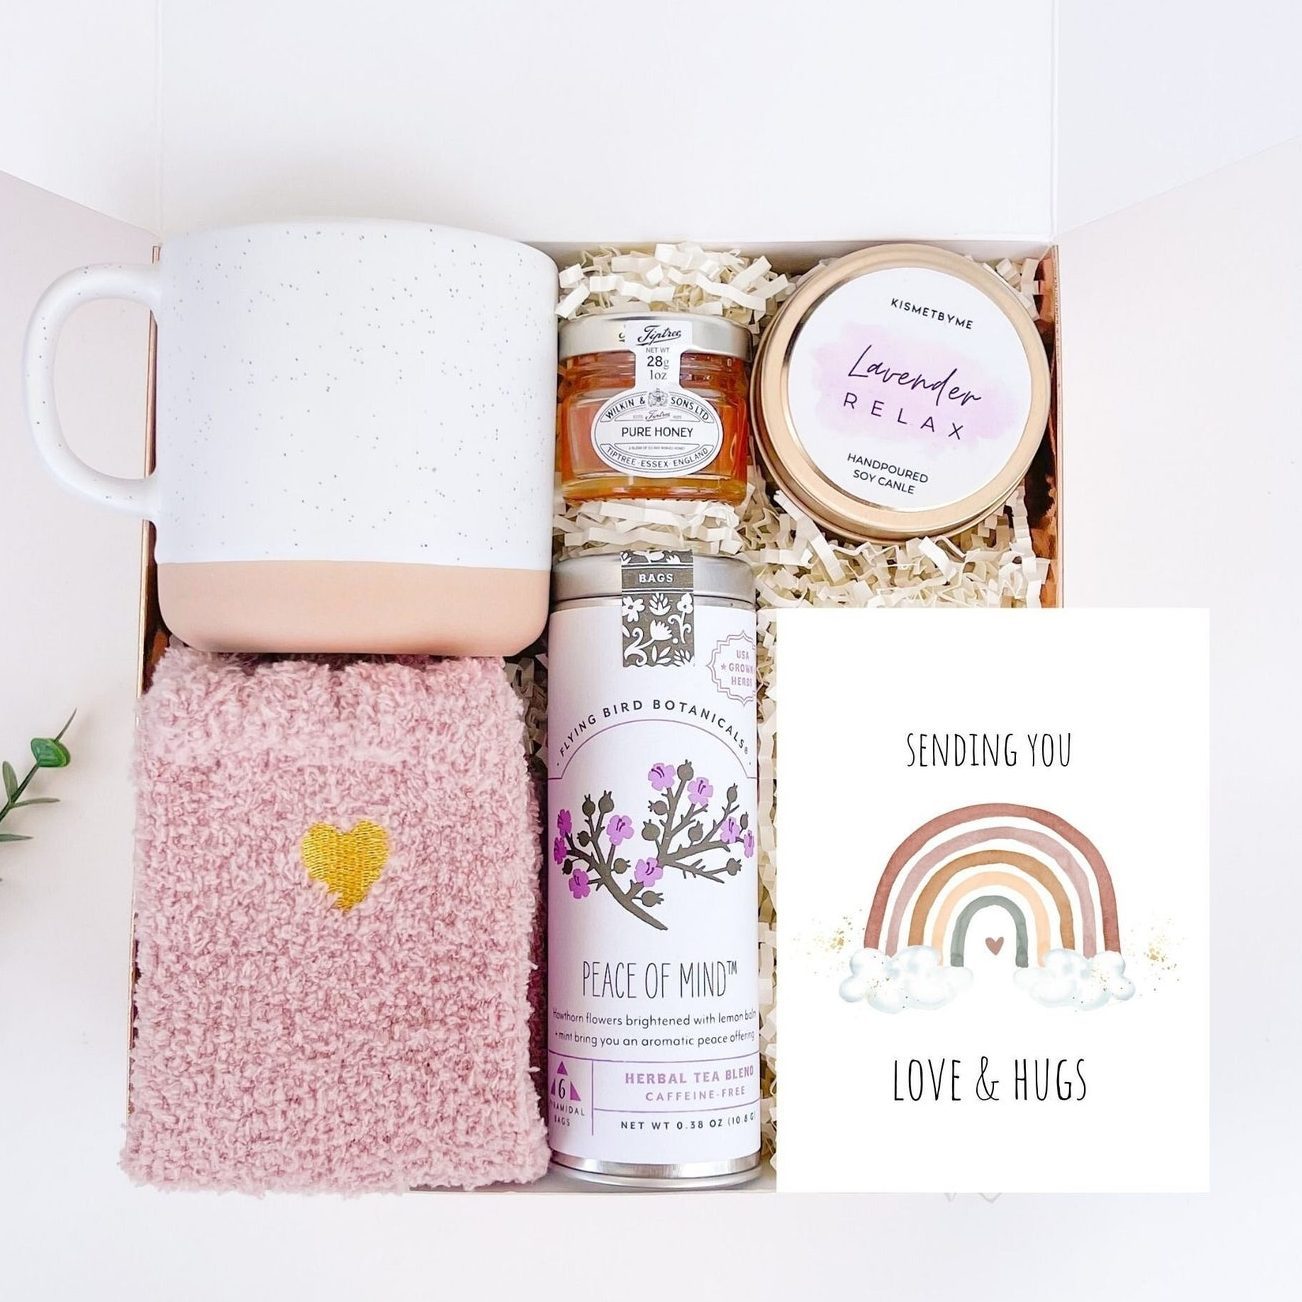 GIFT GUIDE FOR NEW MOMS - Katie Did What